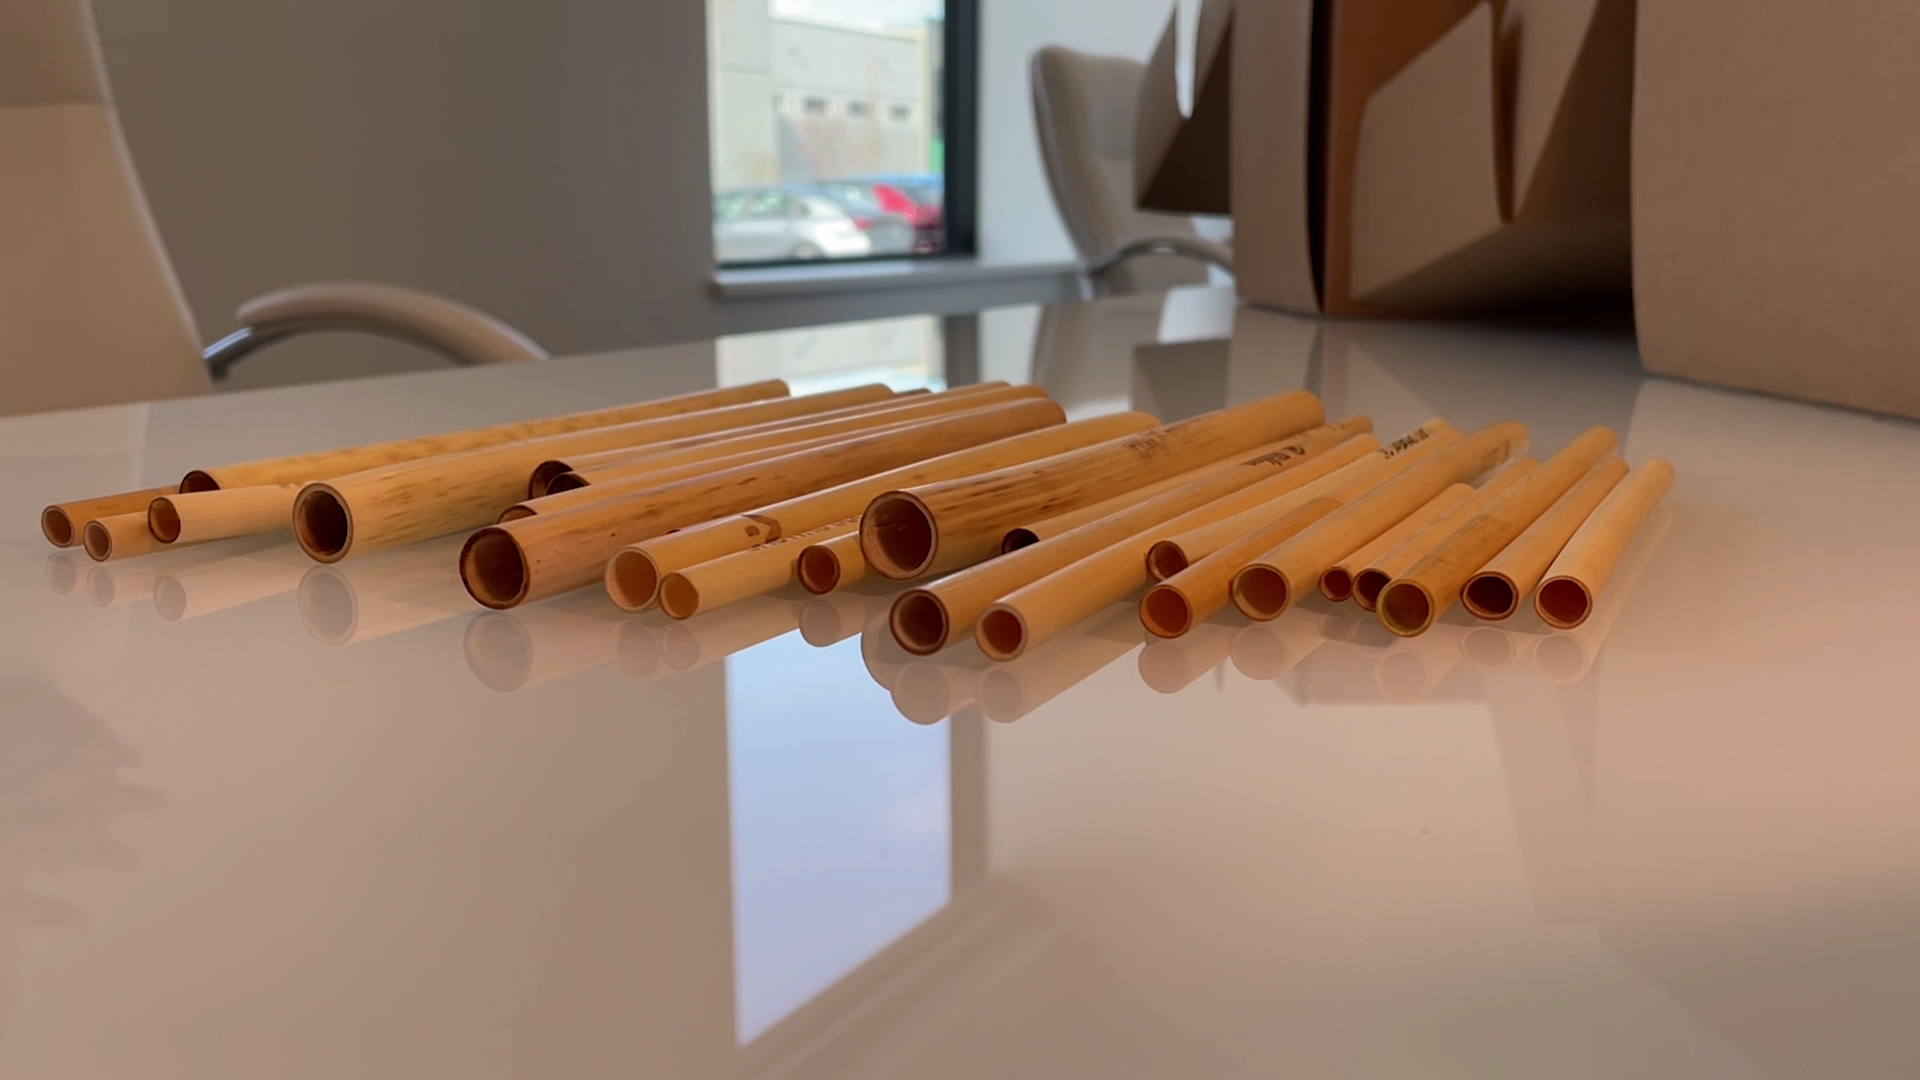 Biodegradable wooden straws are shown.